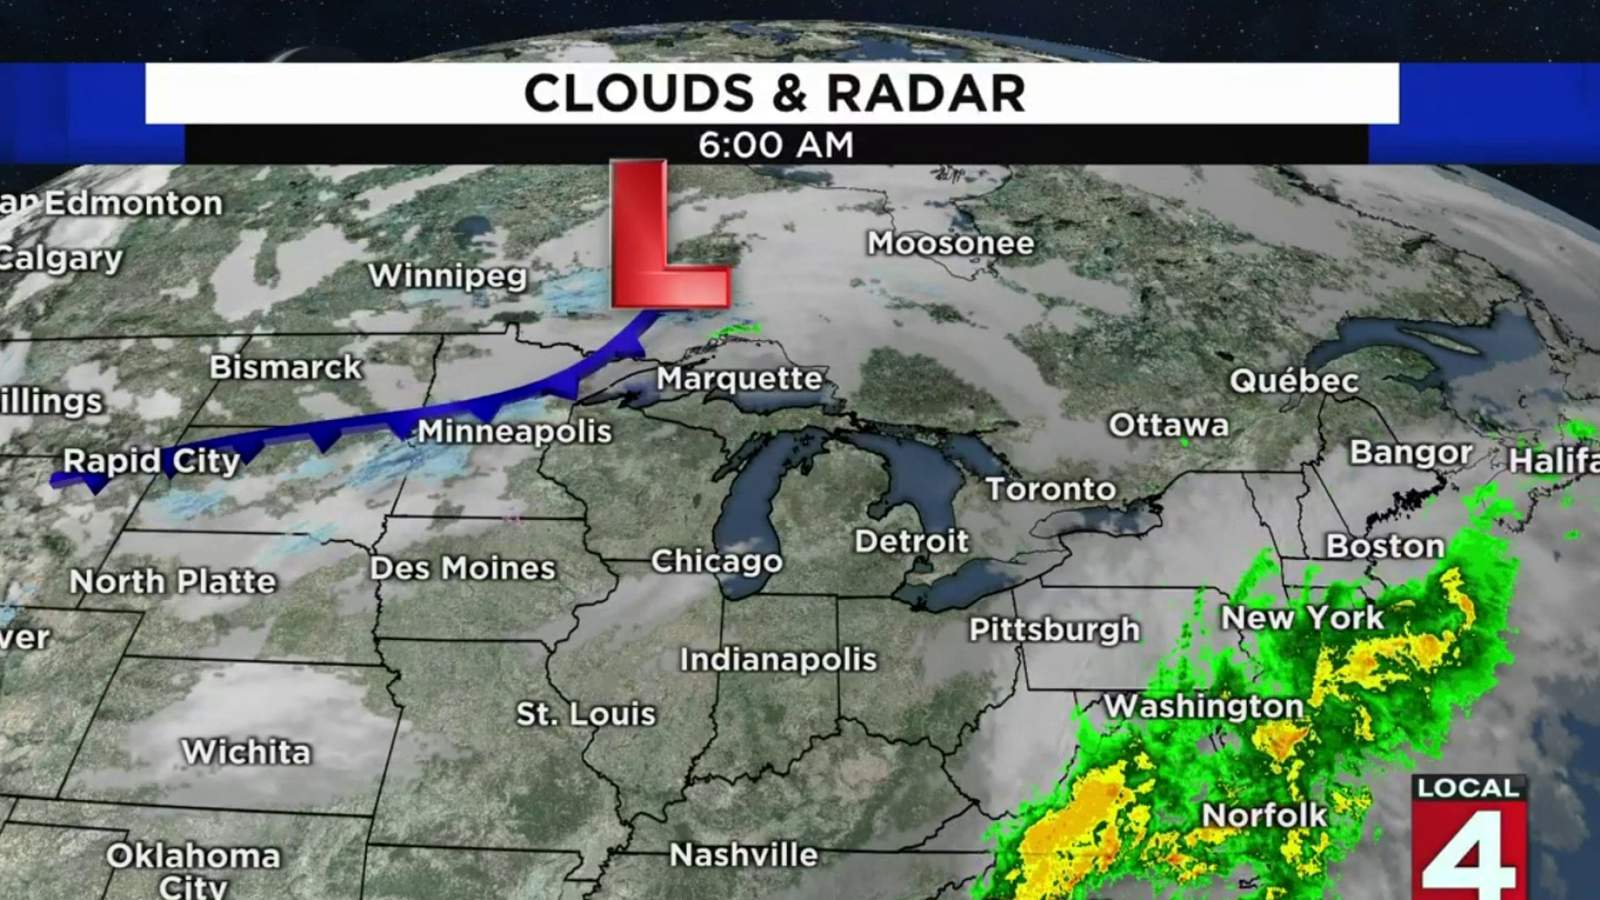 Metro Detroit weather: Not a bad fall day